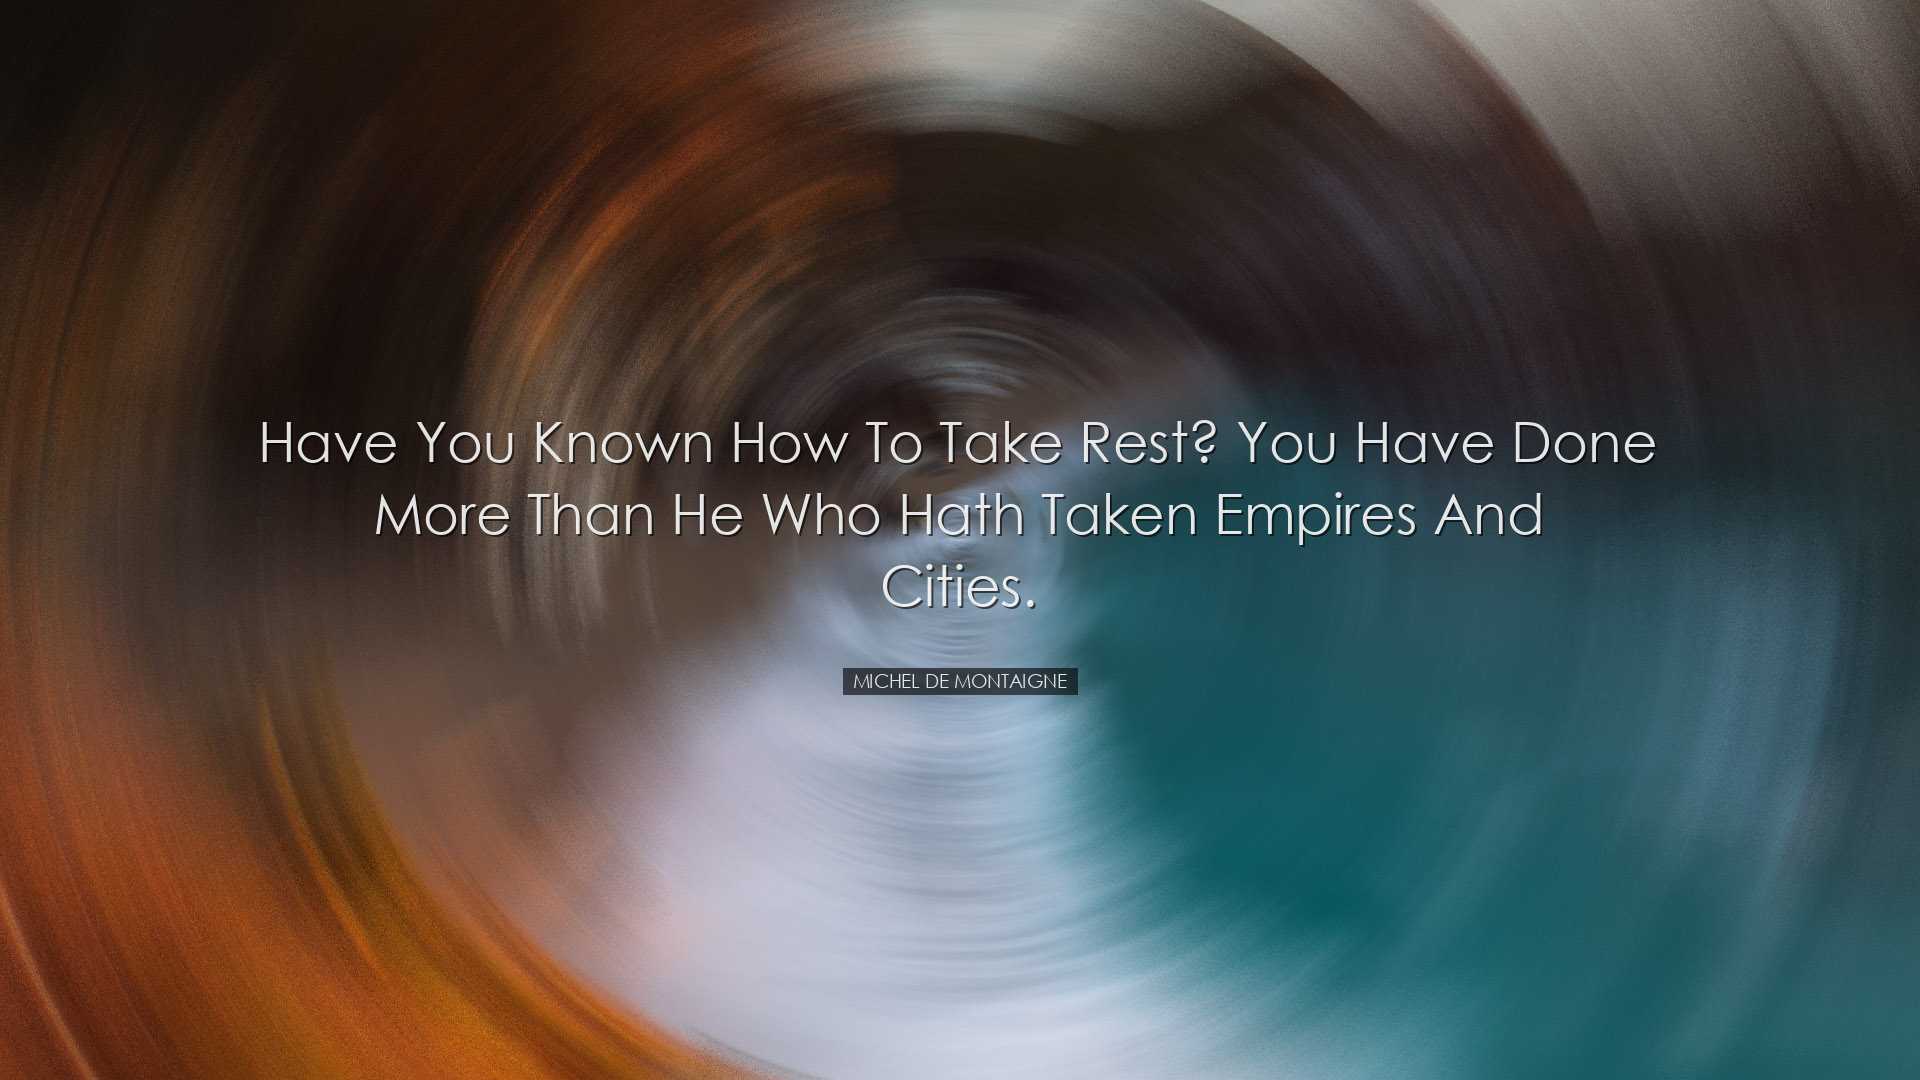 Have you known how to take rest? You have done more than he who ha